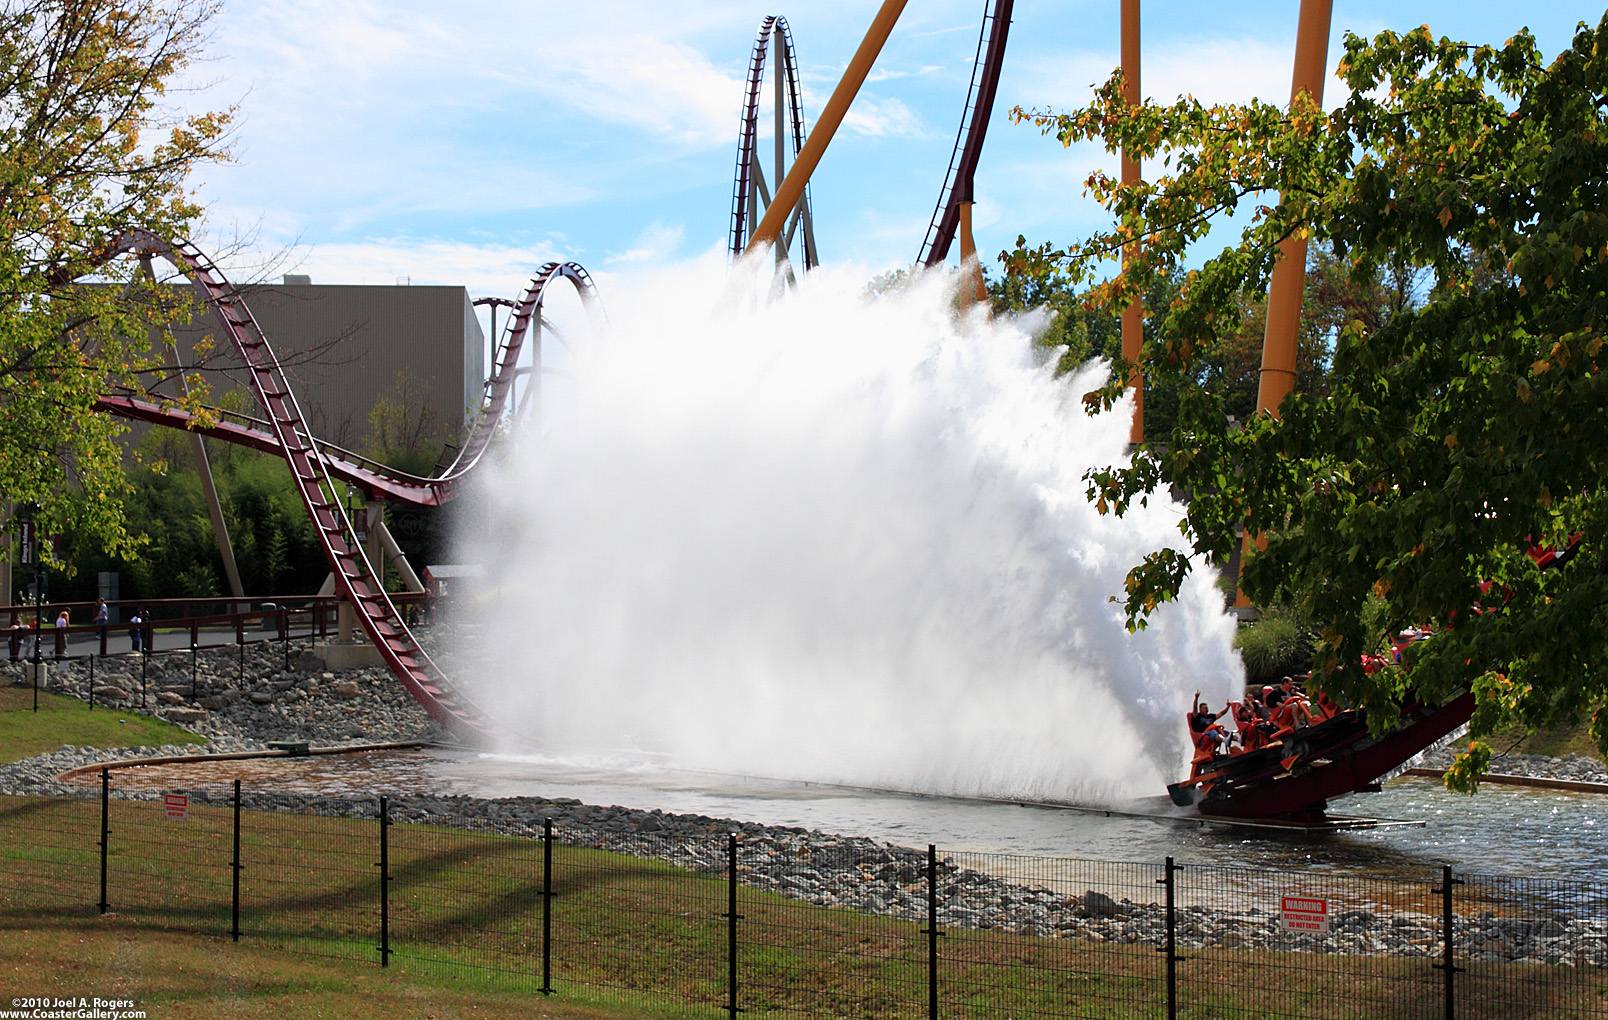 Coaster going through the water